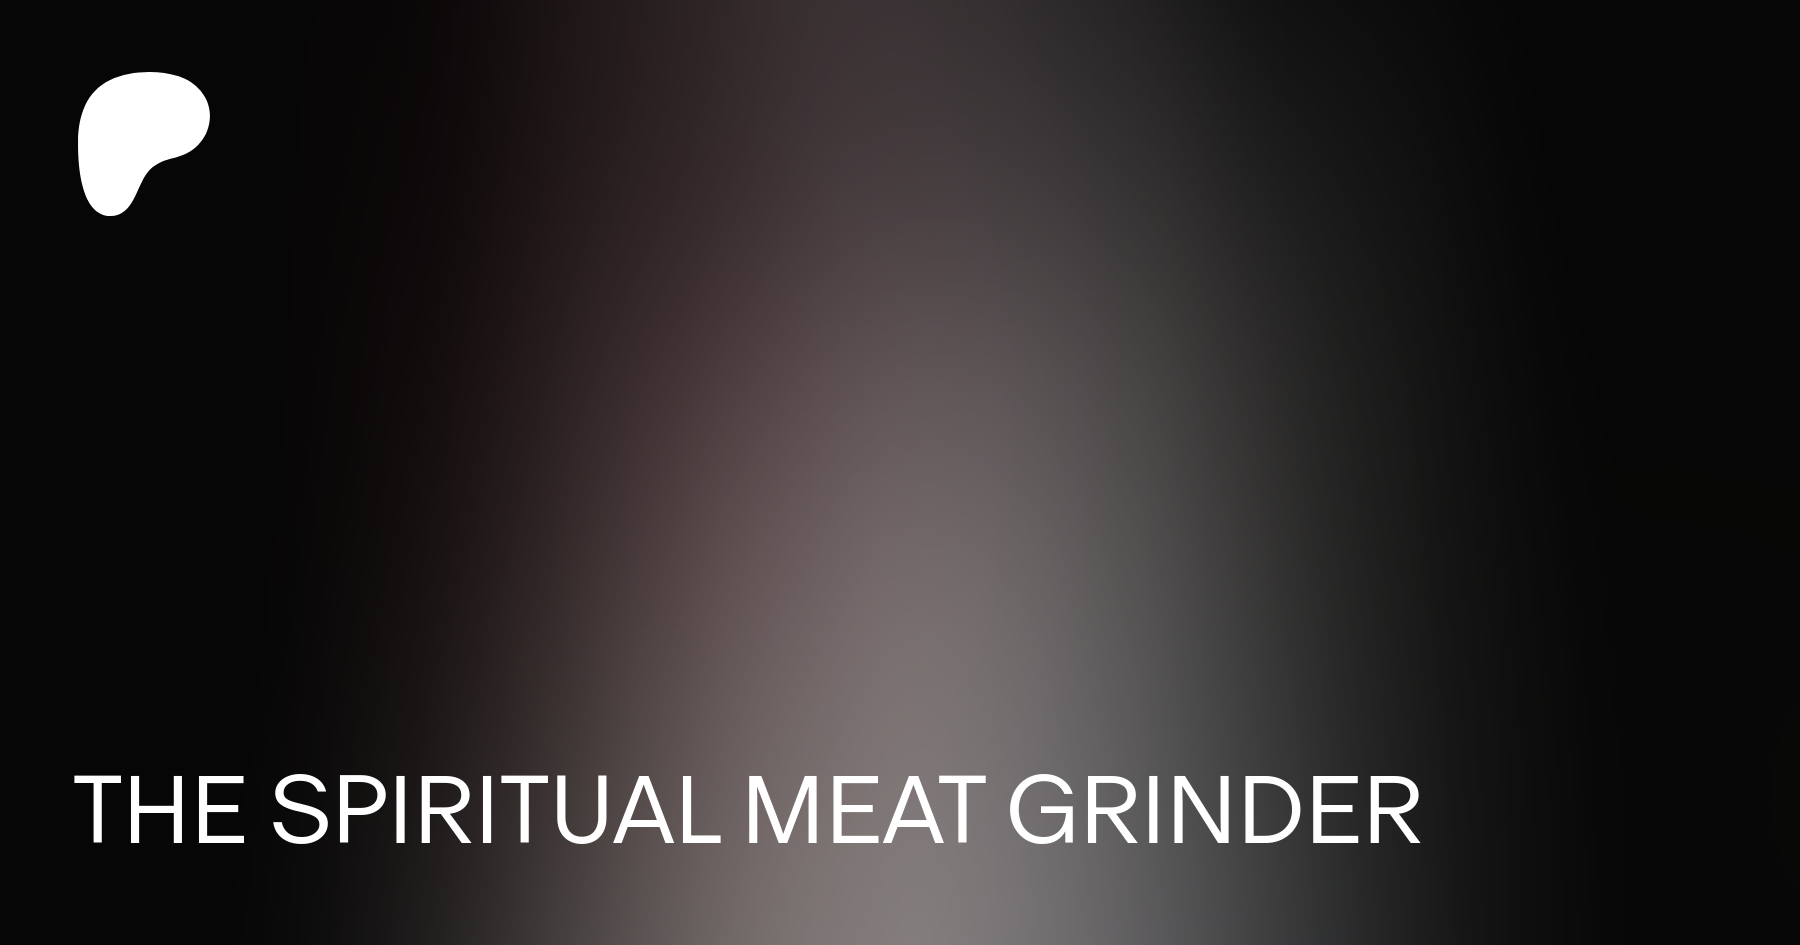 Zheani has released her new mixtape, 'The Spiritual Meat Grinder